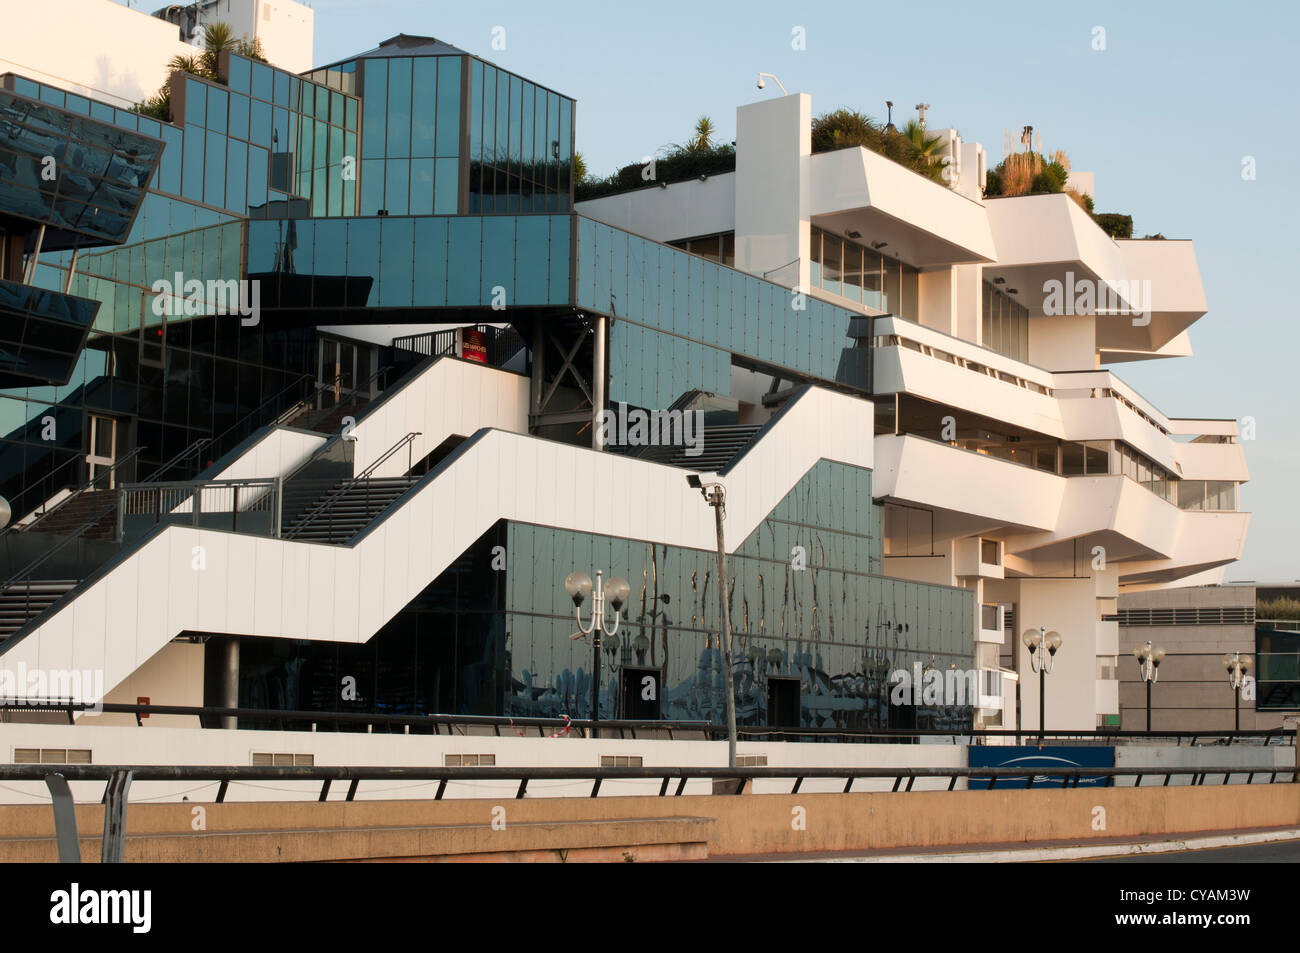 Palace of popular cinema festival in Cannes. Stock Photo